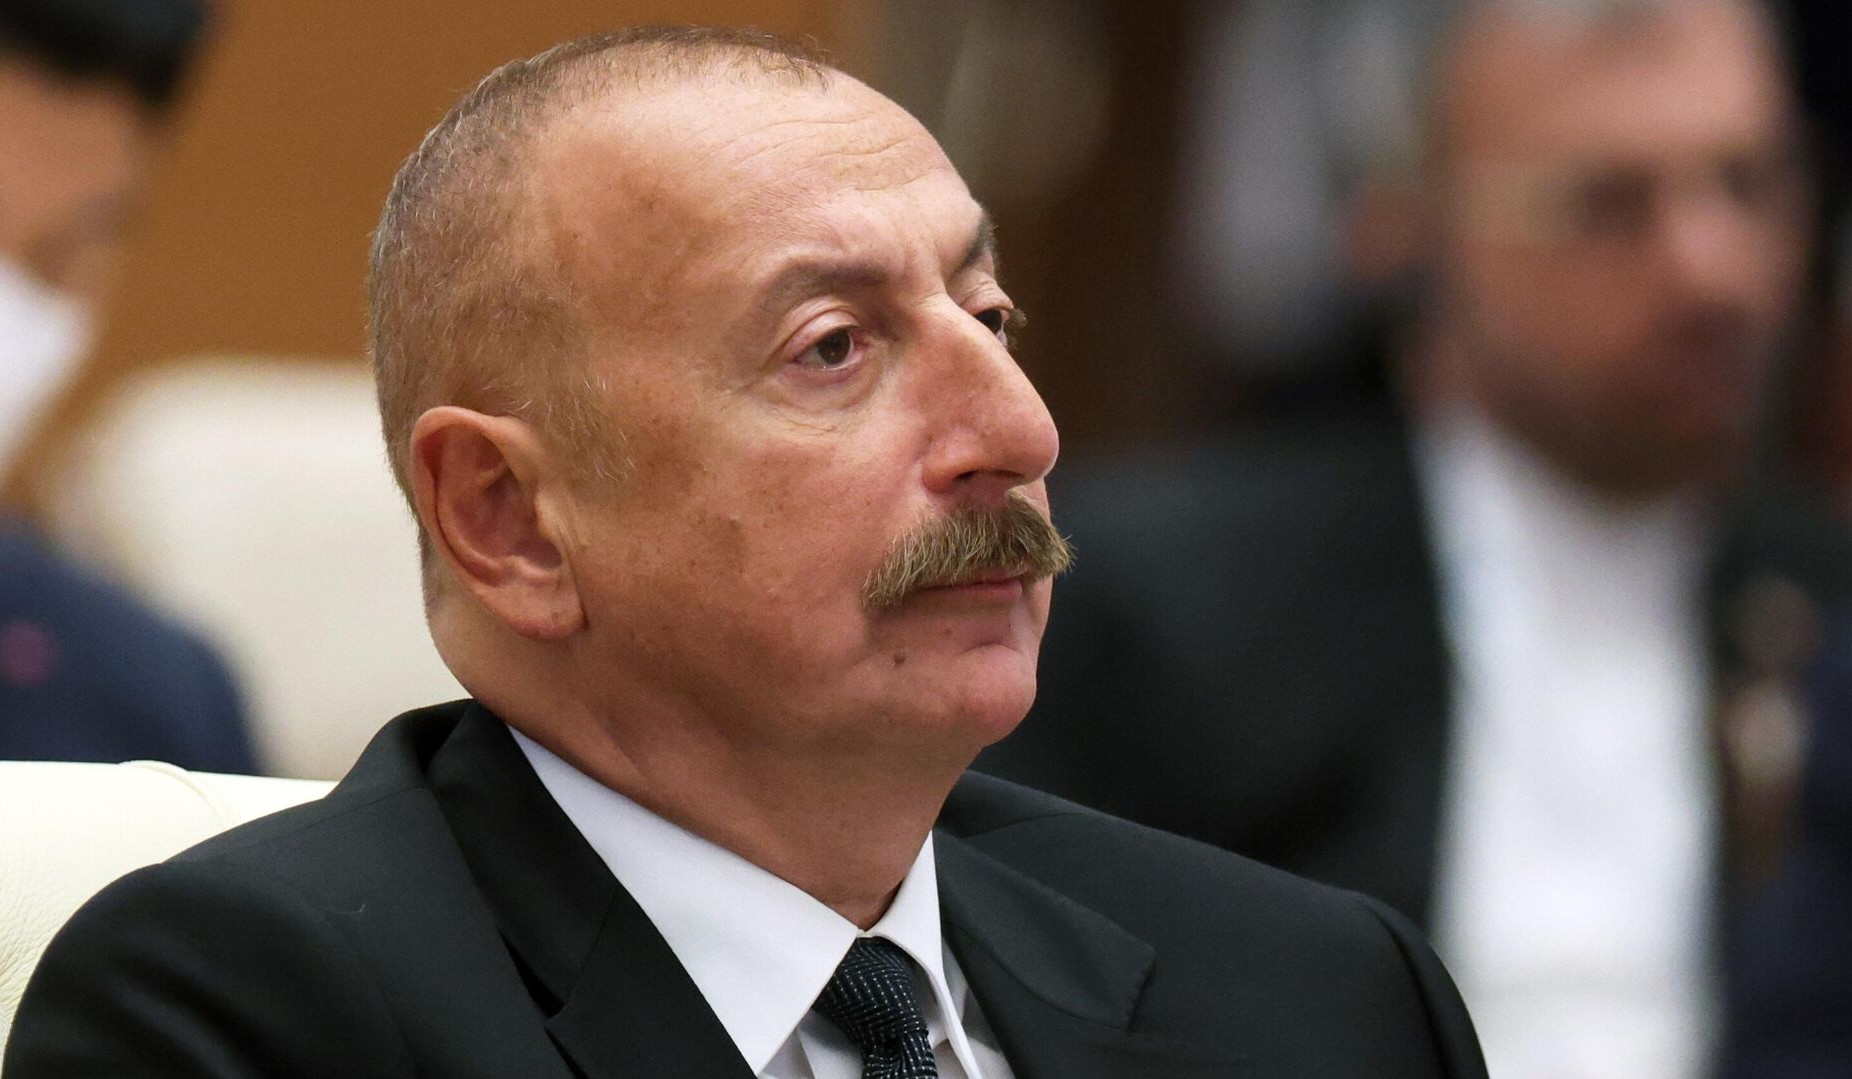 All issues in bilateral relations with Russia have been resolved: Aliyev